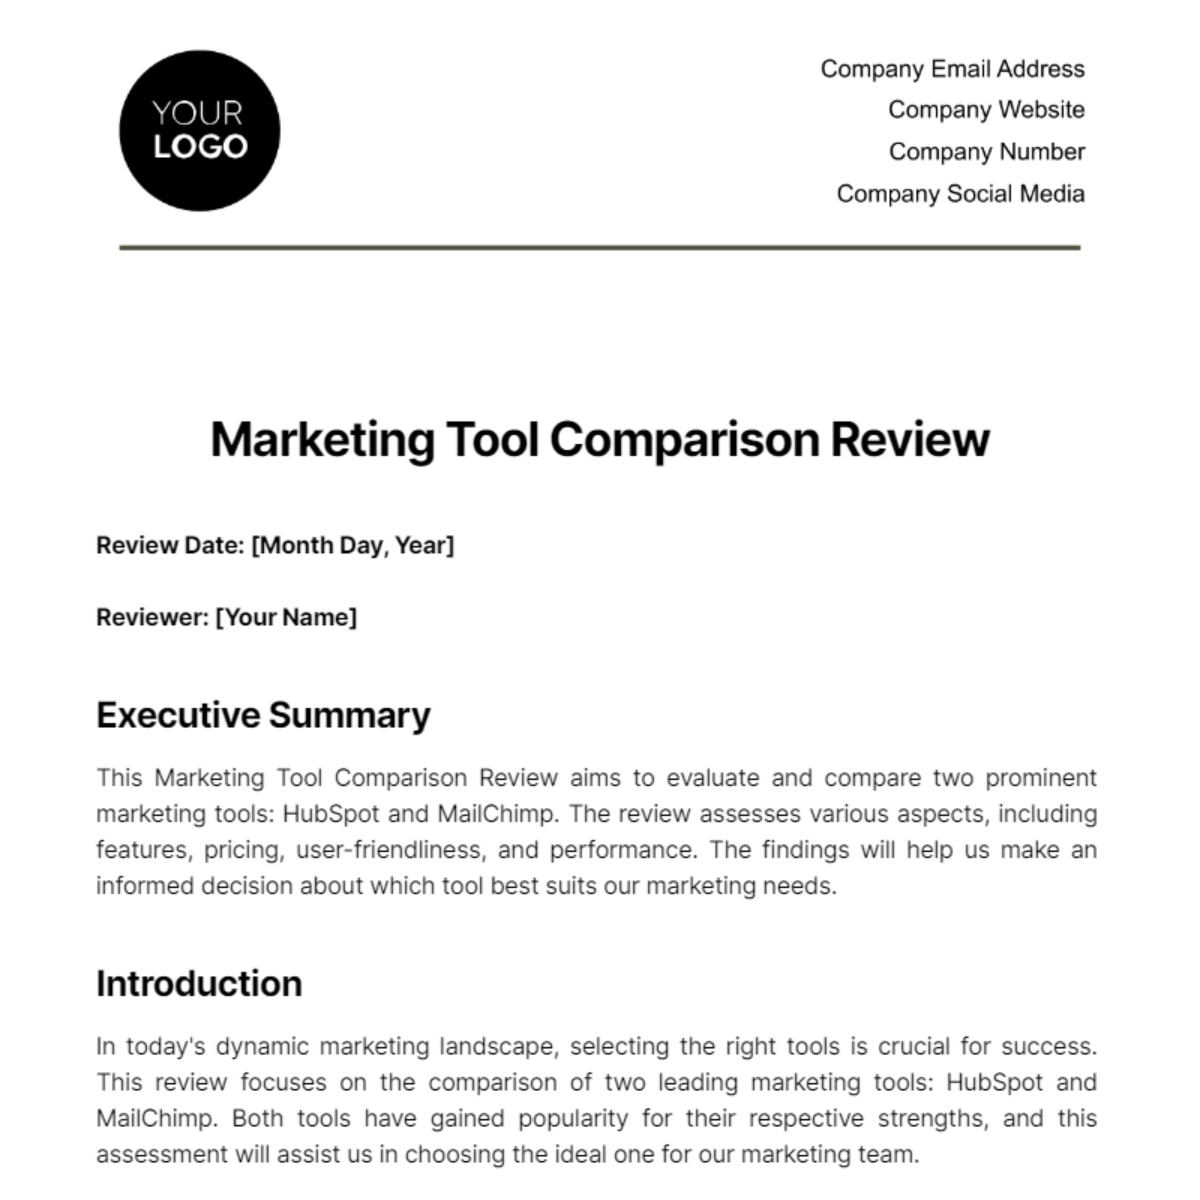 Free Marketing Tool Comparison Review Template